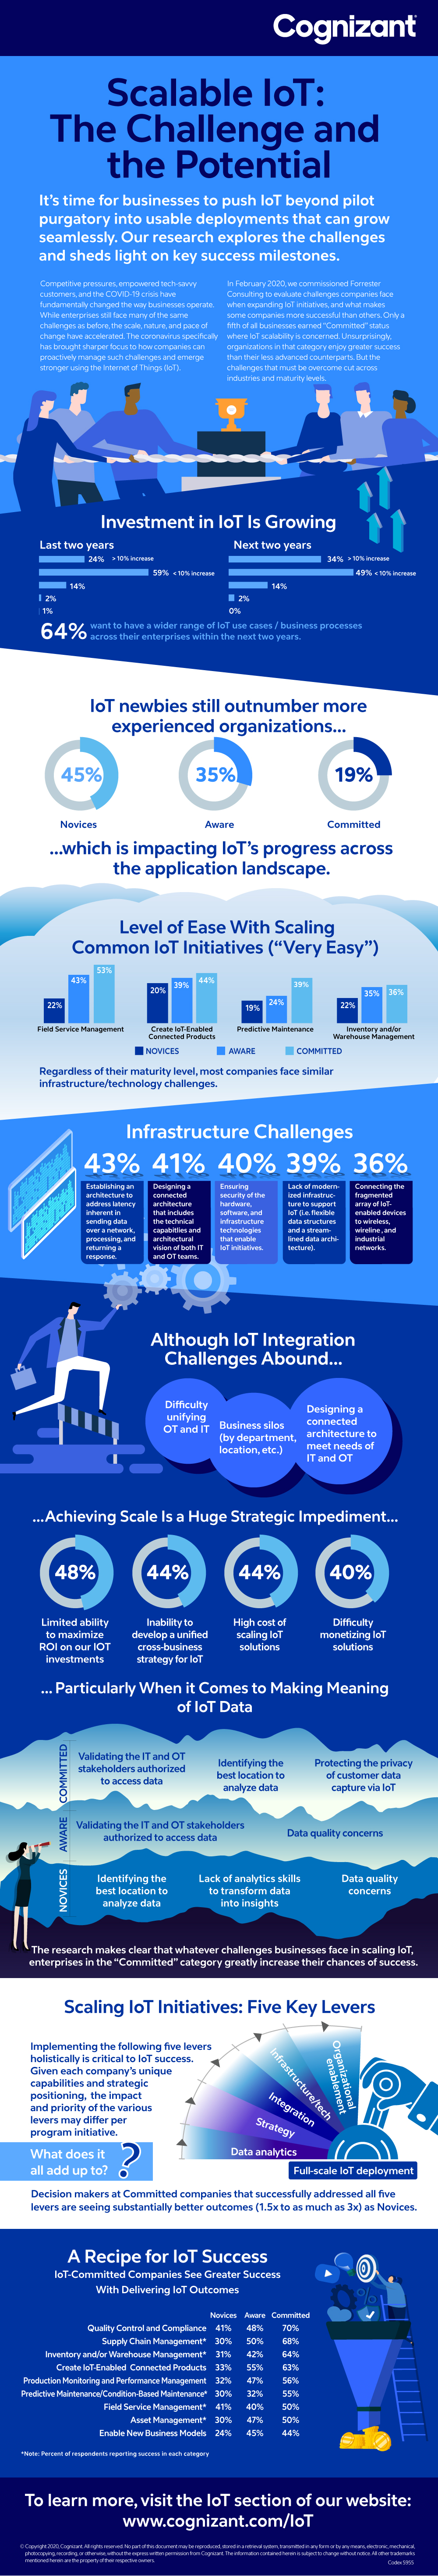 beyond pilot purgatory creating iot programs that scale infographic